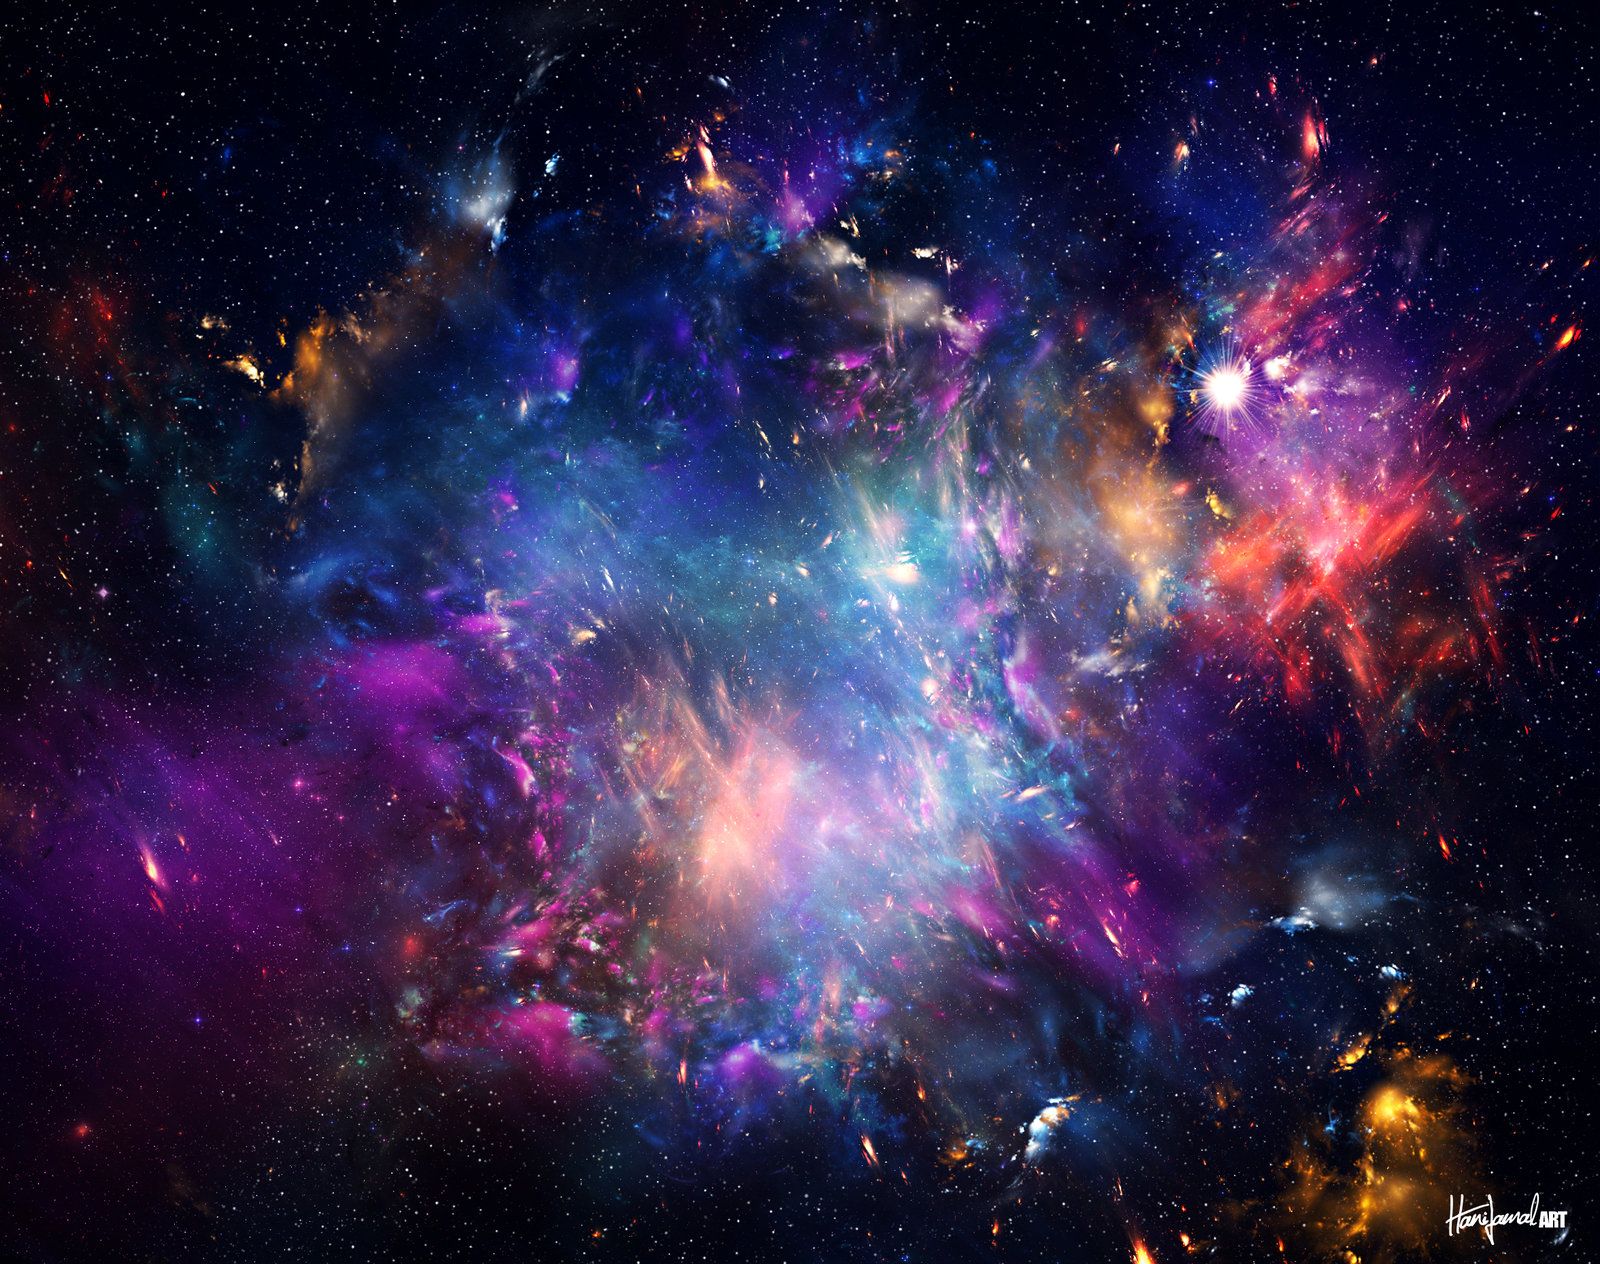 SPACE BACKGROUNDS FOR TUMBLR - Space Backgrounds